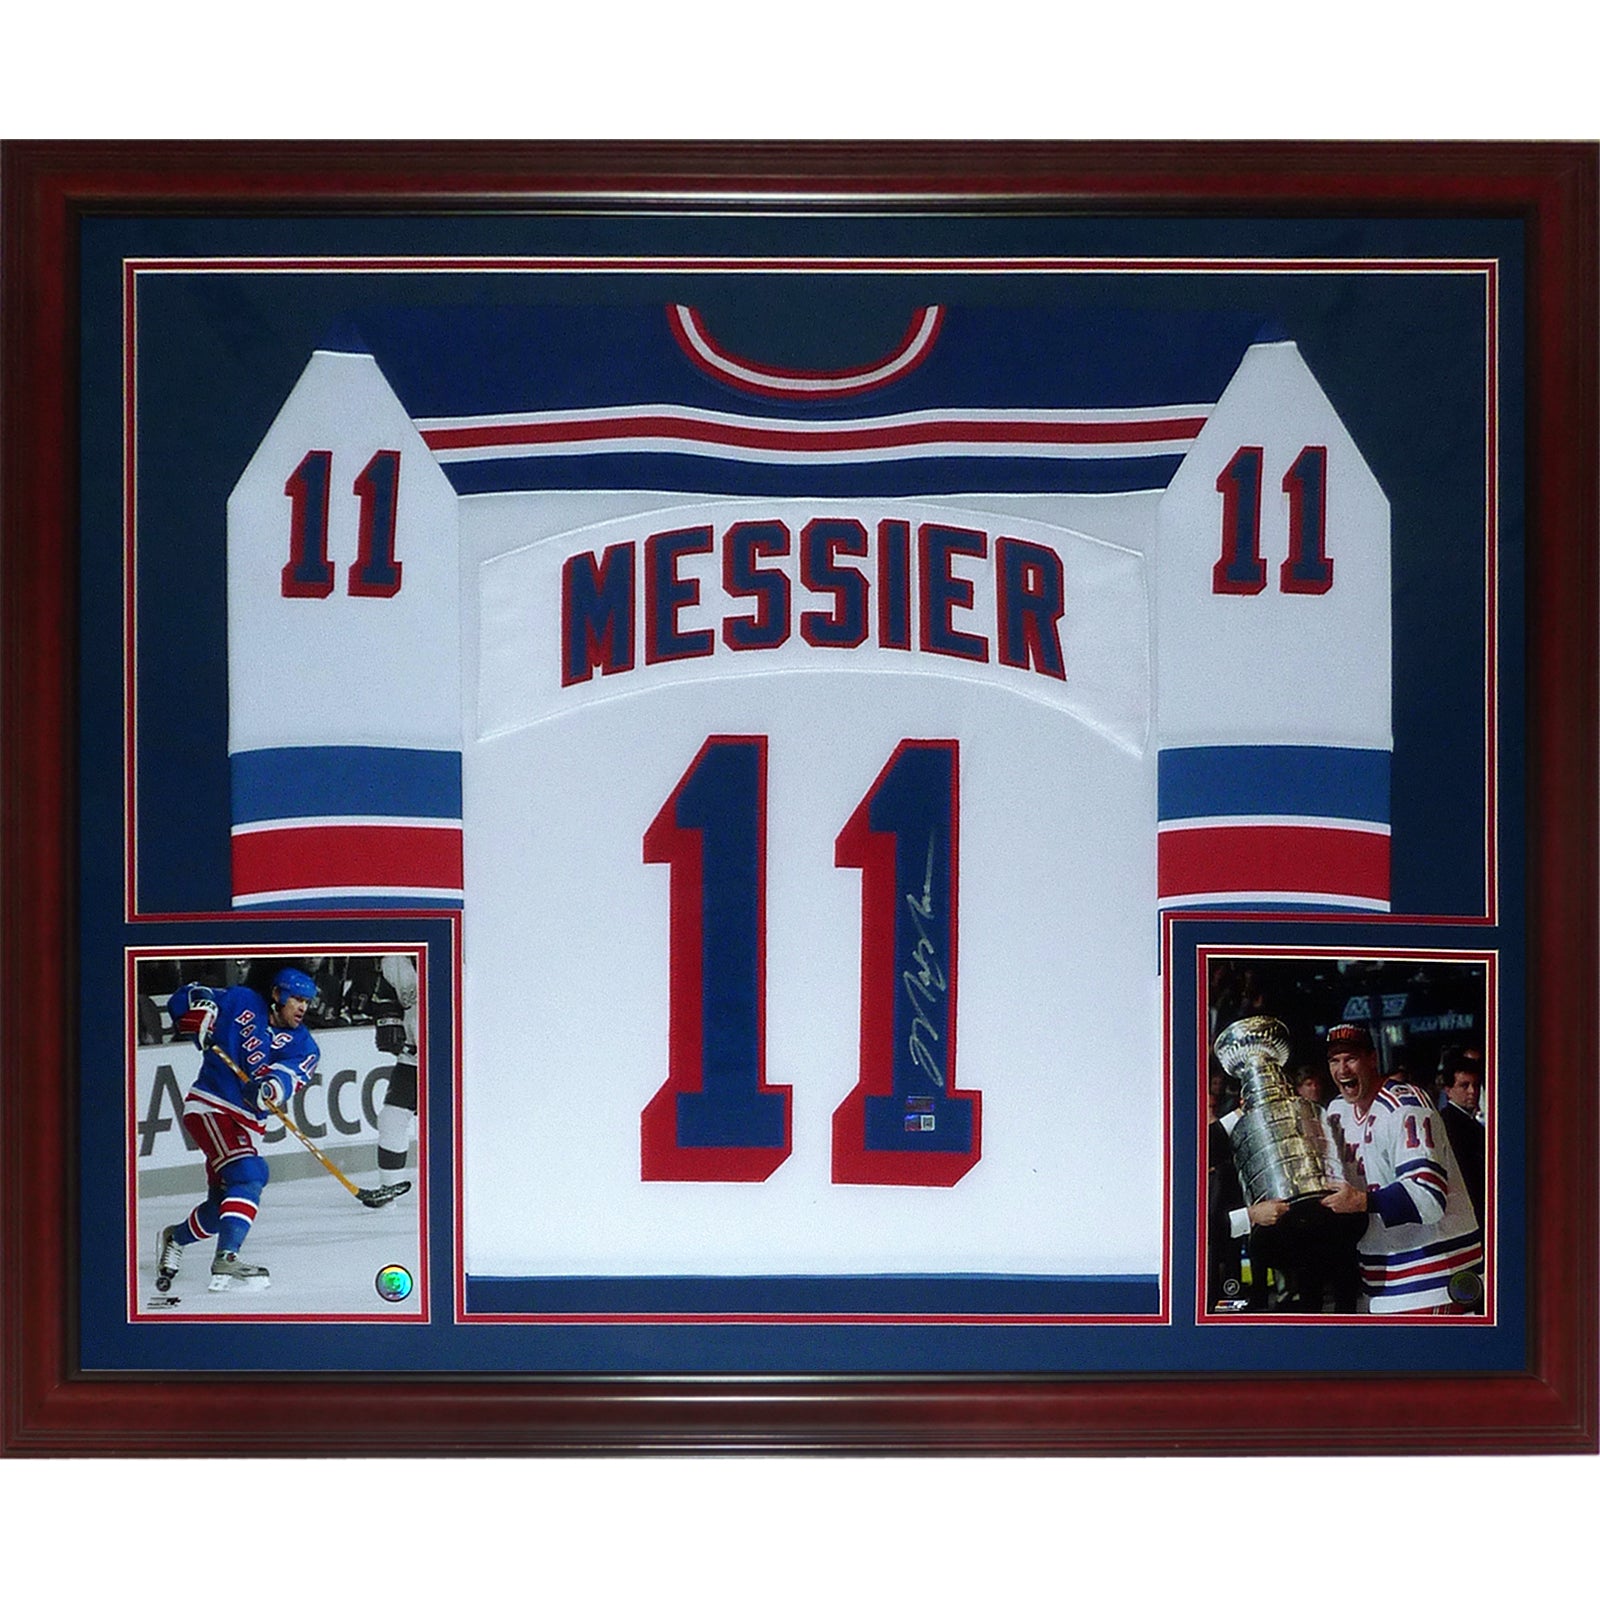 Mark Messier autographed (New York Rangers) Jersey